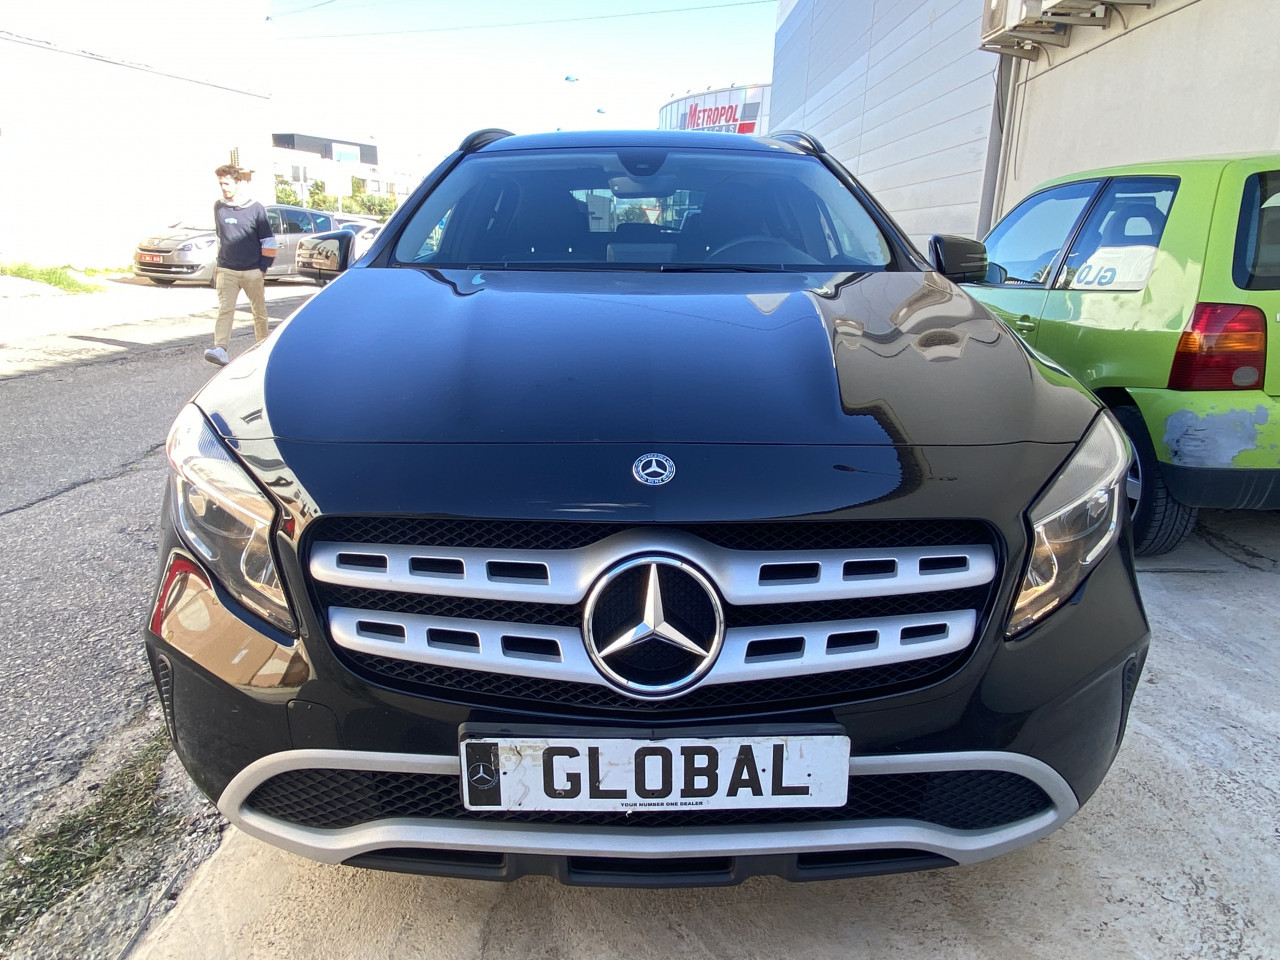 Mercedes-Benz Gla 180D Style 7 Gear Tronic Automatic Photo